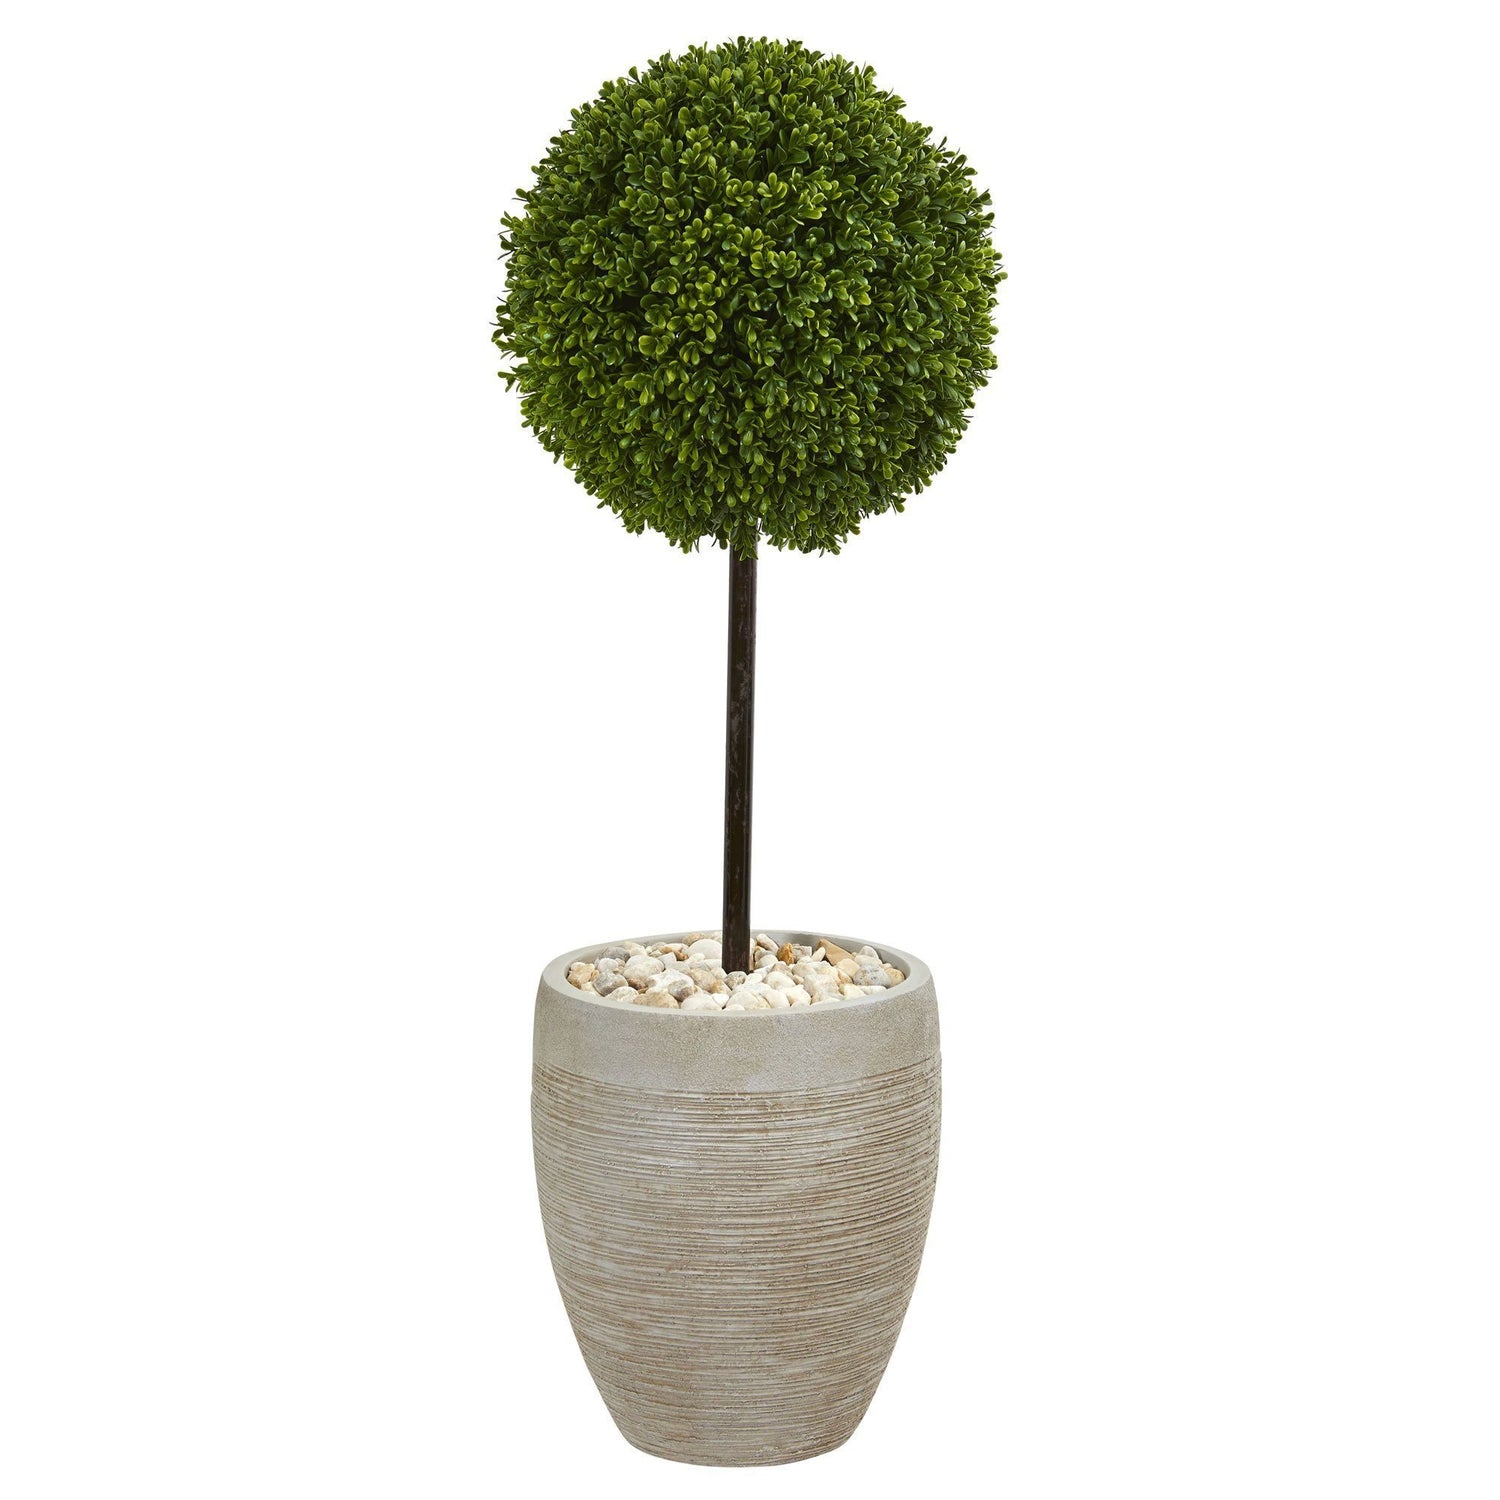 3’ Boxwood Ball Topiary Artificial Tree in Oval Planter UV Resistant (Indoor/Outdoor)